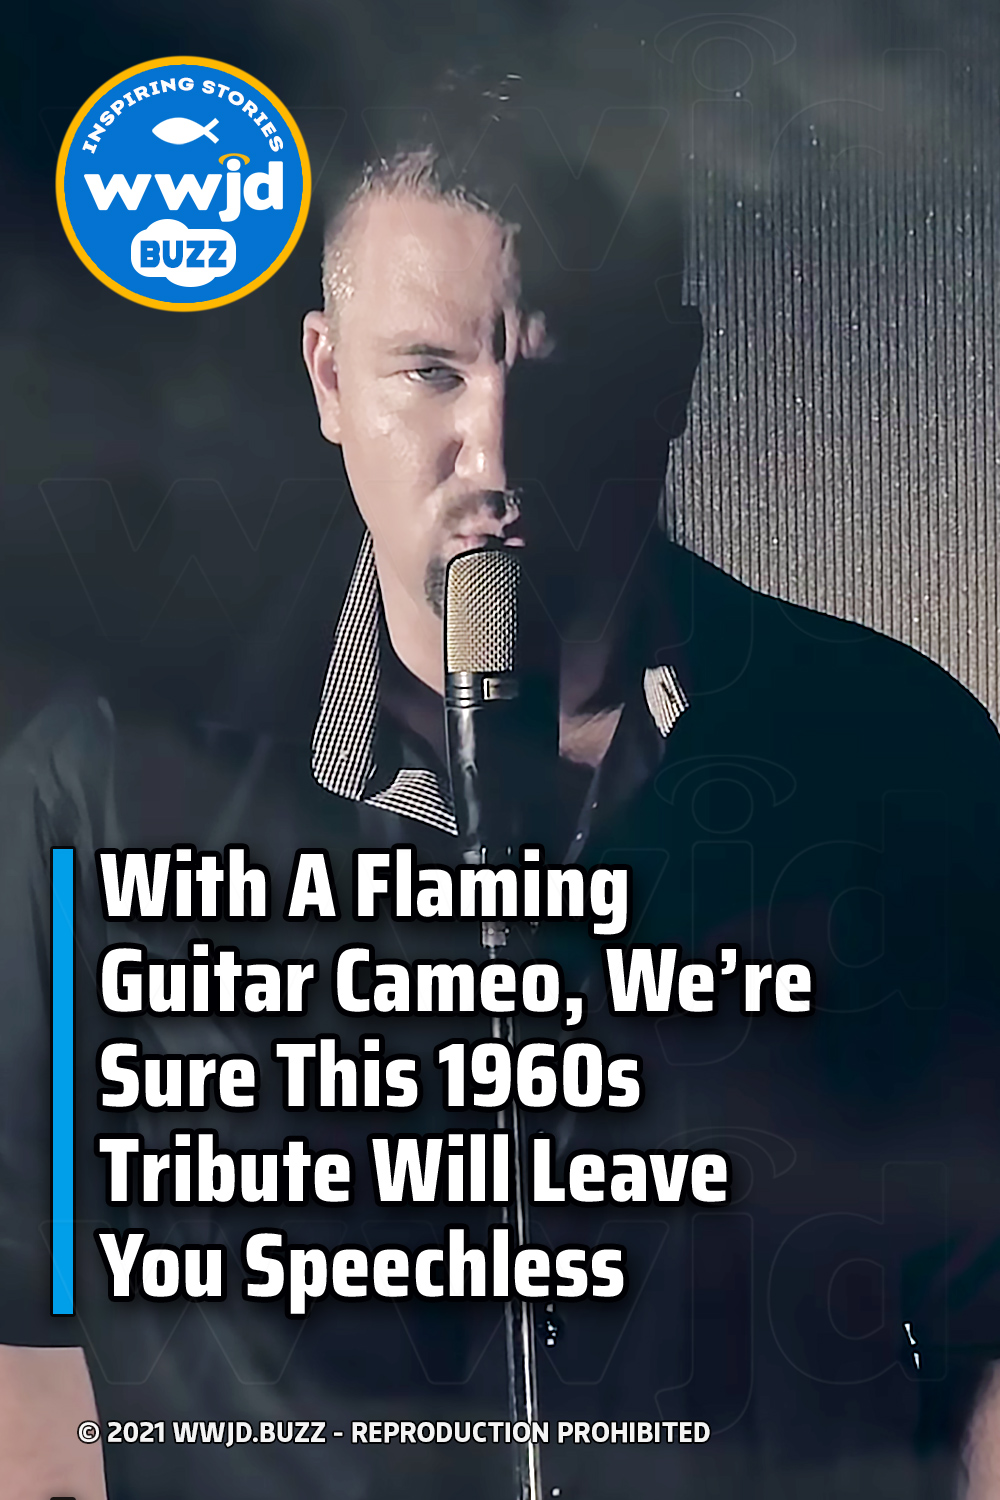 With A Flaming Guitar Cameo, We’re Sure This 1960s Tribute Will Leave You Speechless